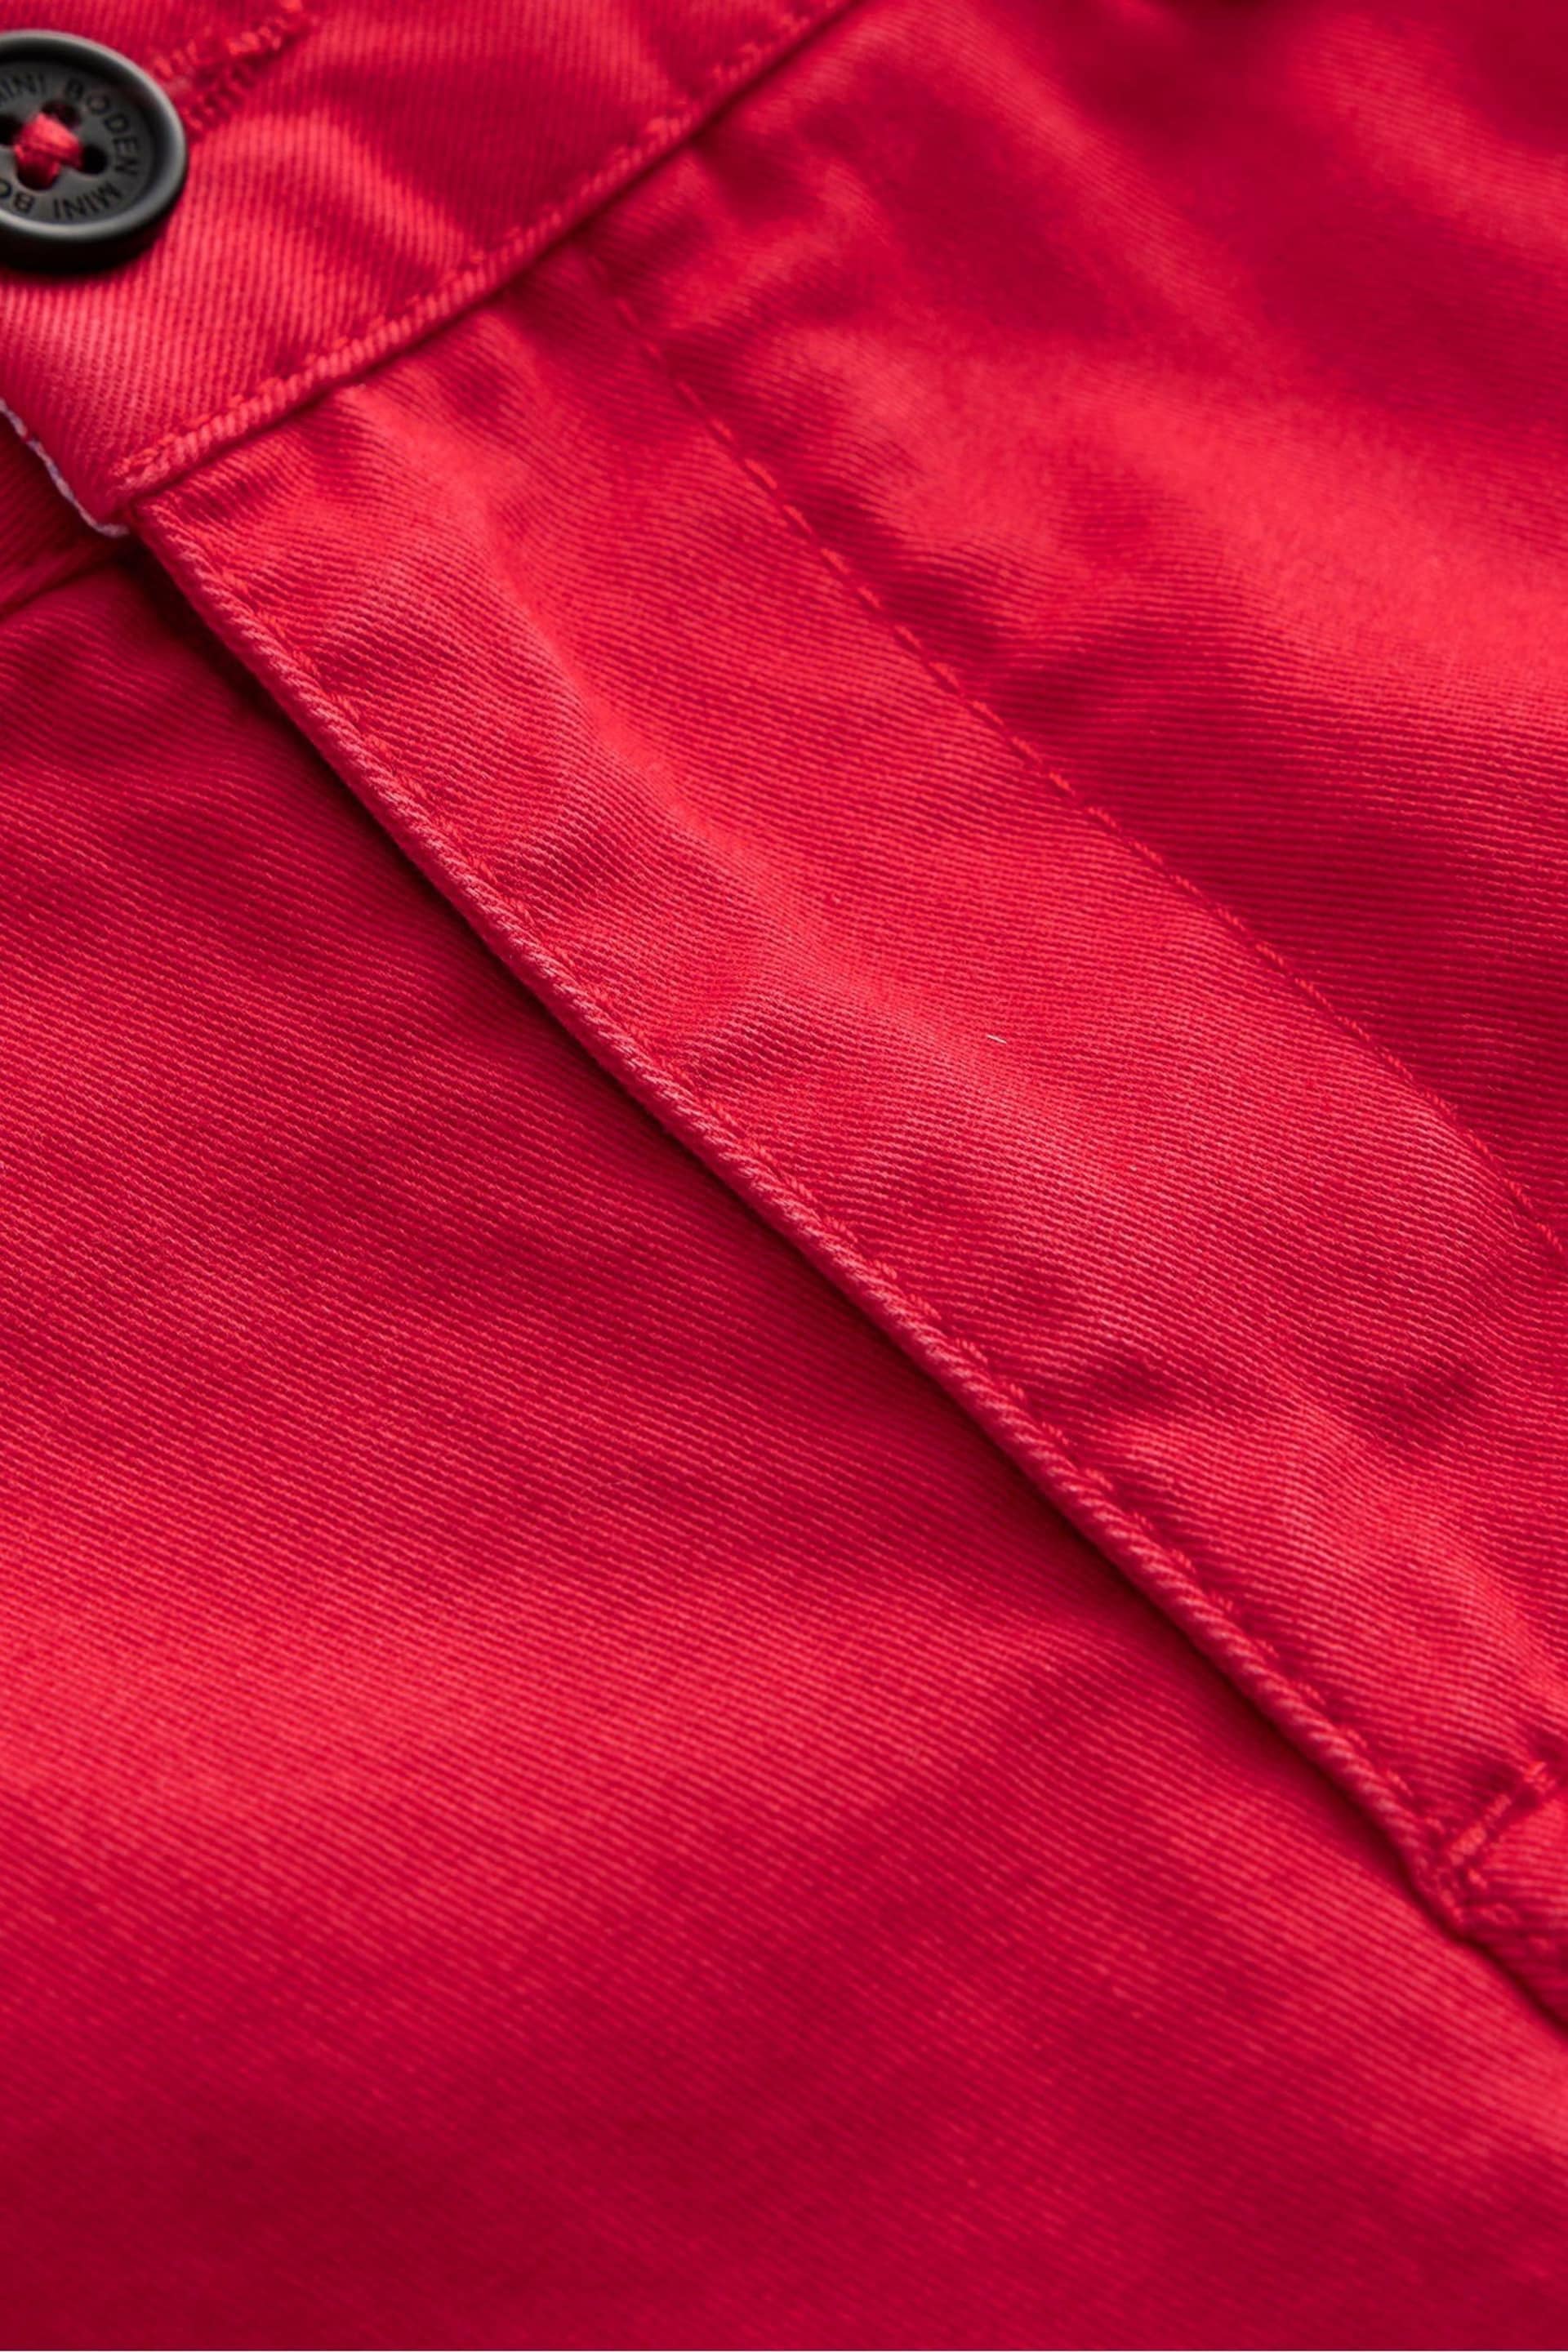 Boden Red Classic Chino Shorts - Image 3 of 3